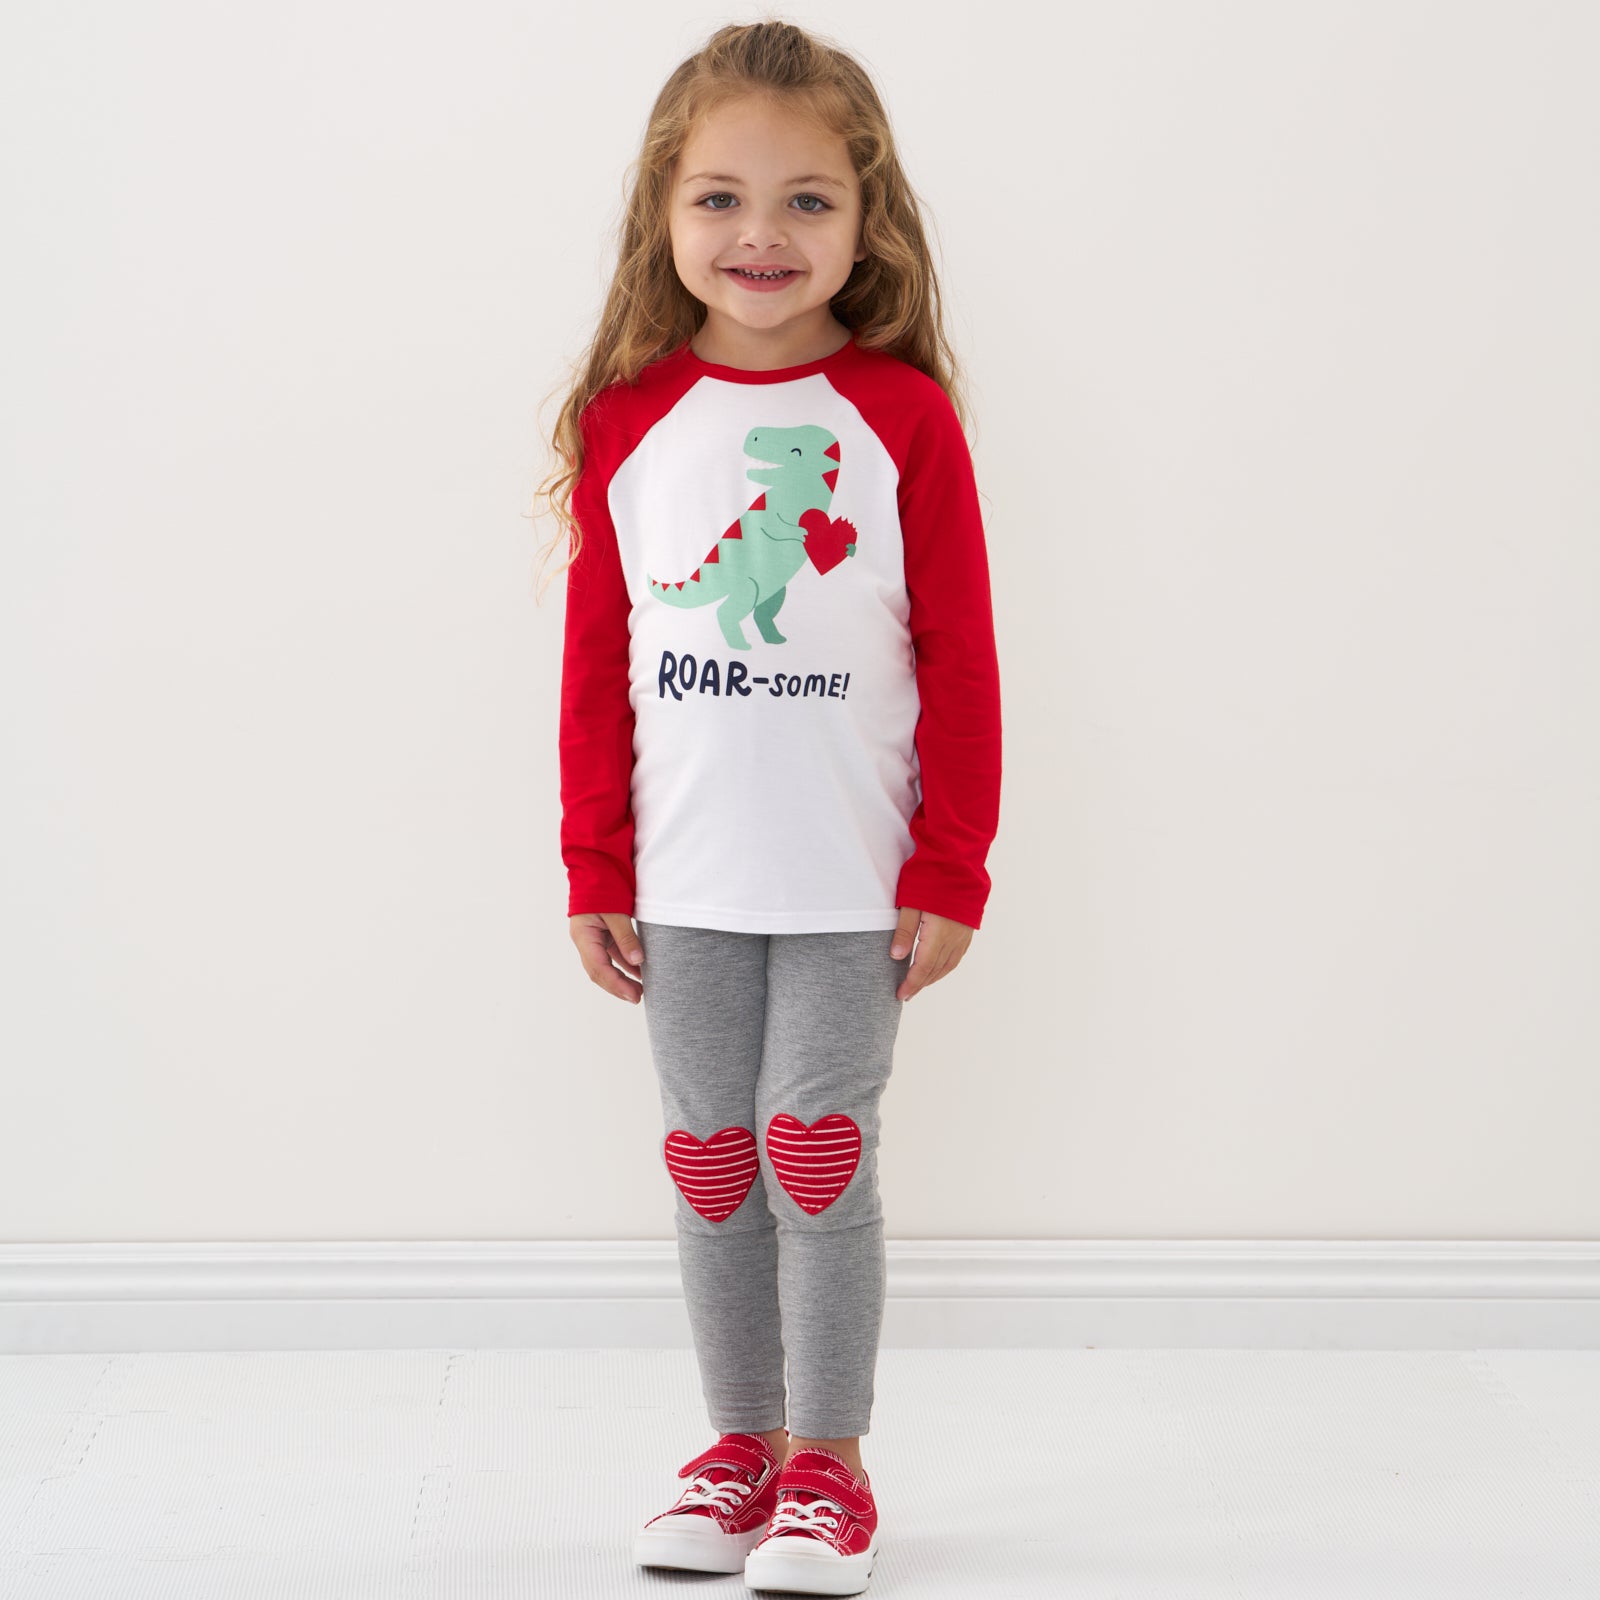 Child wearing Heart Patch leggings and coordinating graphic tee